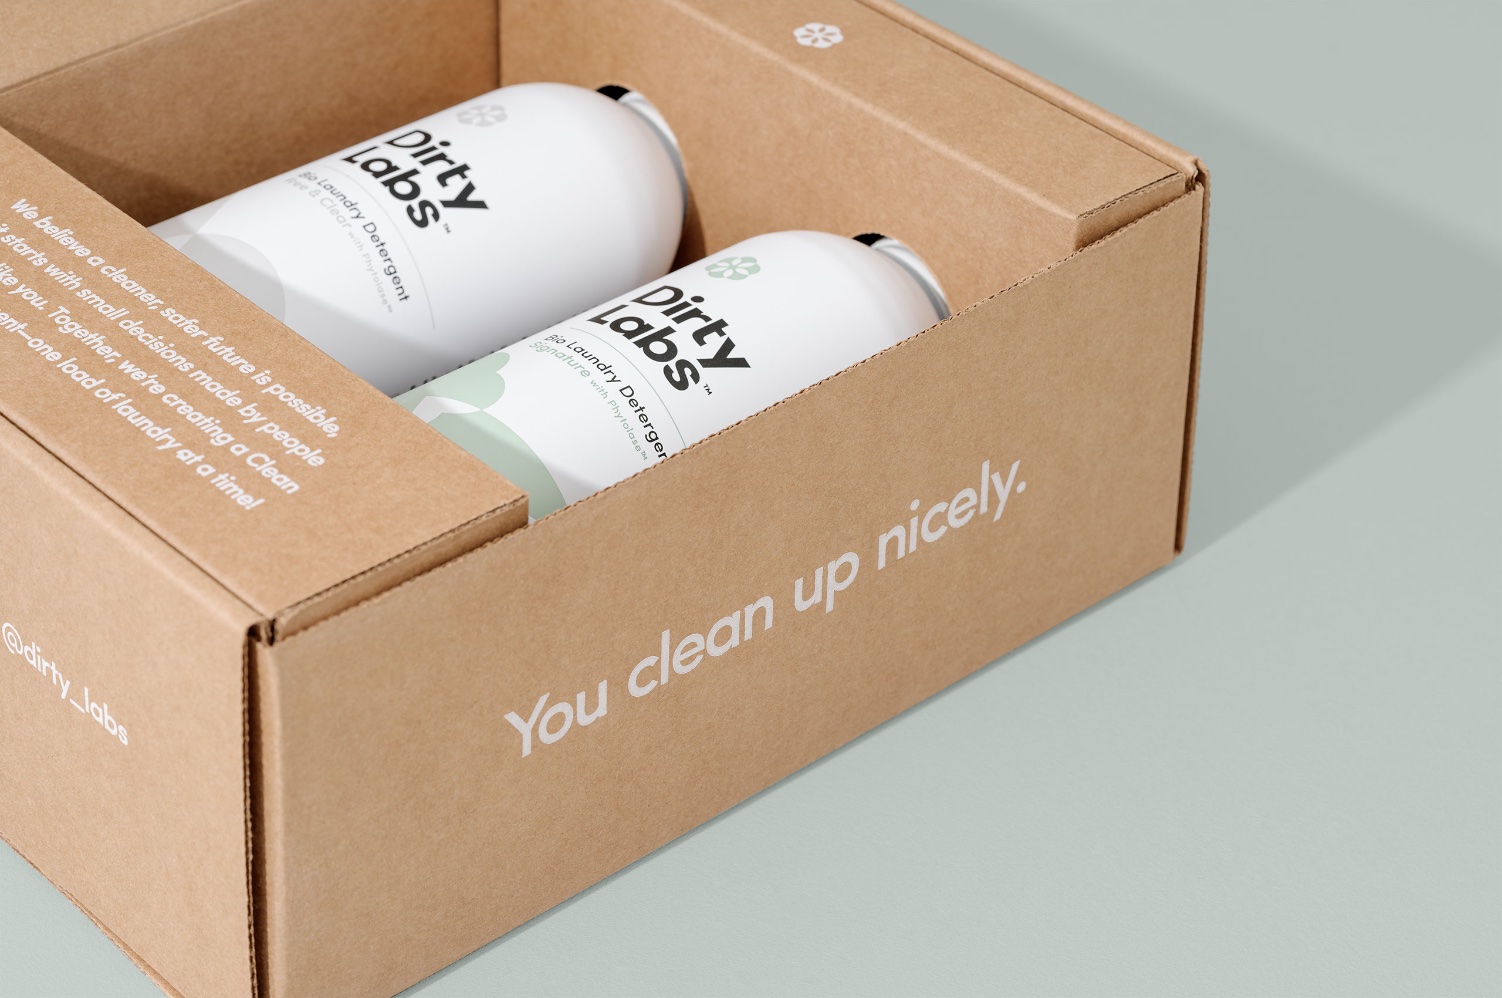 Mast-Designed Brand Dirty Labs Aims To Make Doing Laundry Cleaner For The Environment